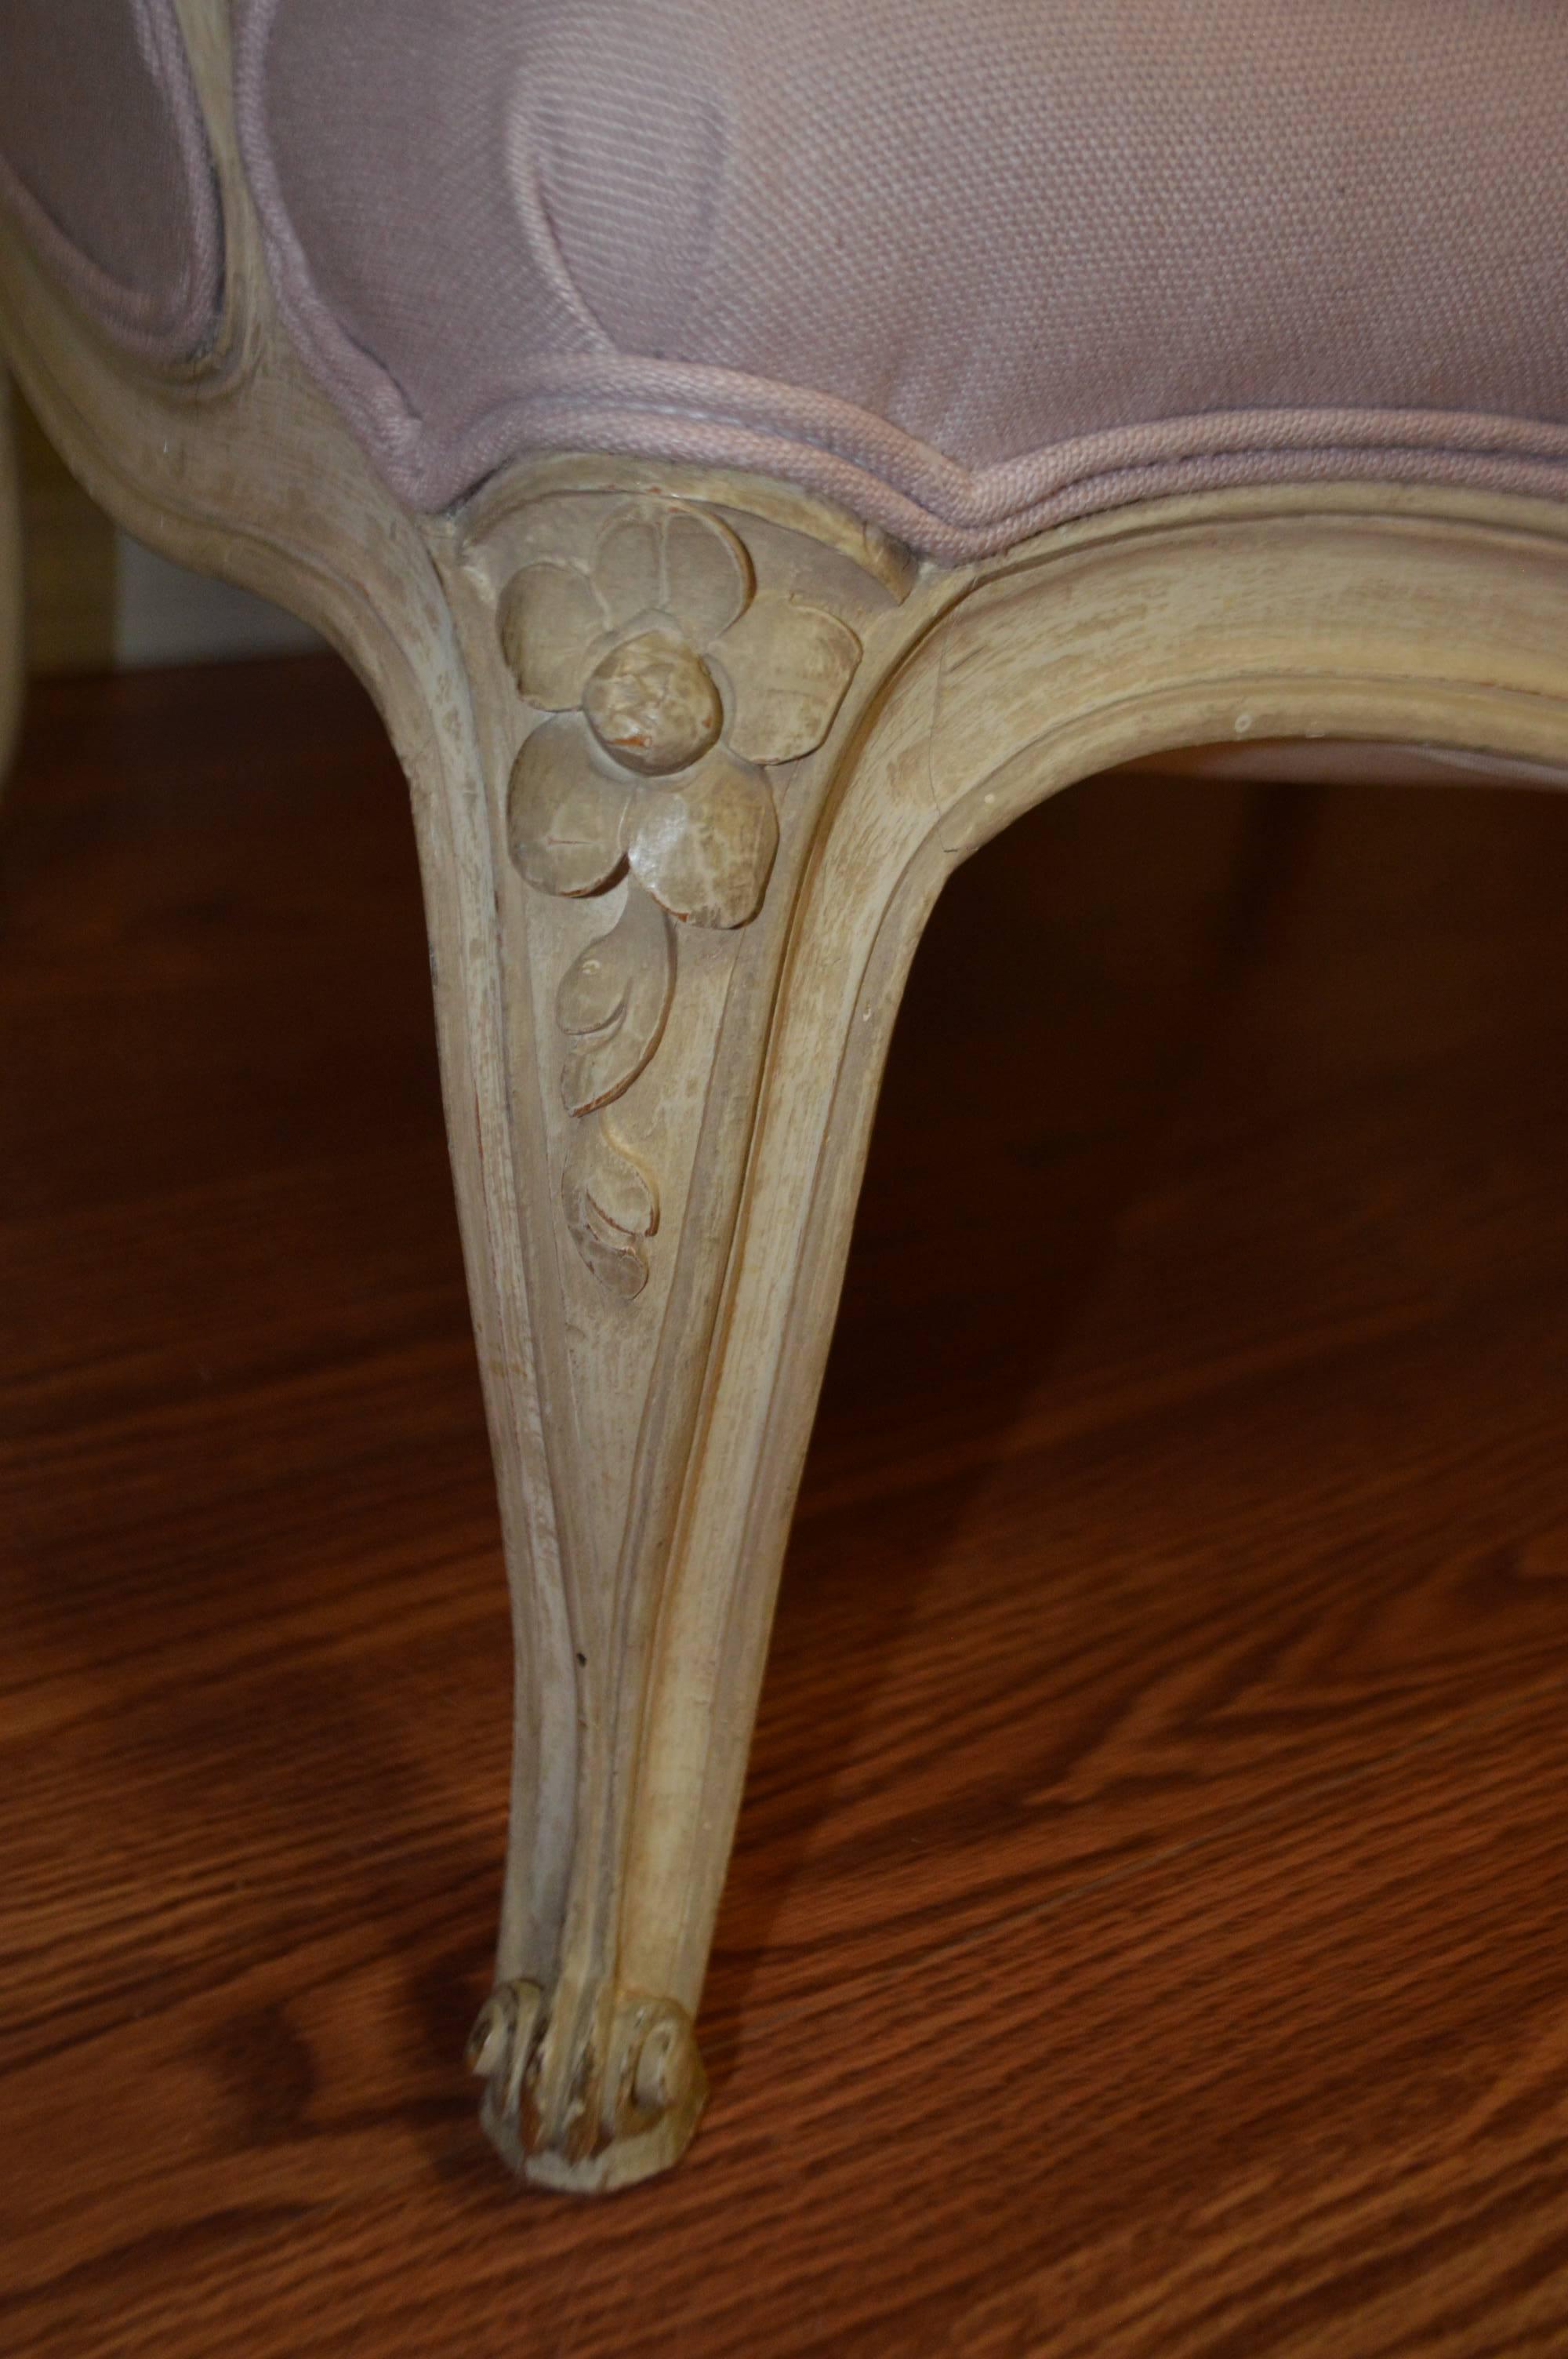 20th Century Louis XV Style Painted Bergere Chair Upholstered in a Lavender Linen